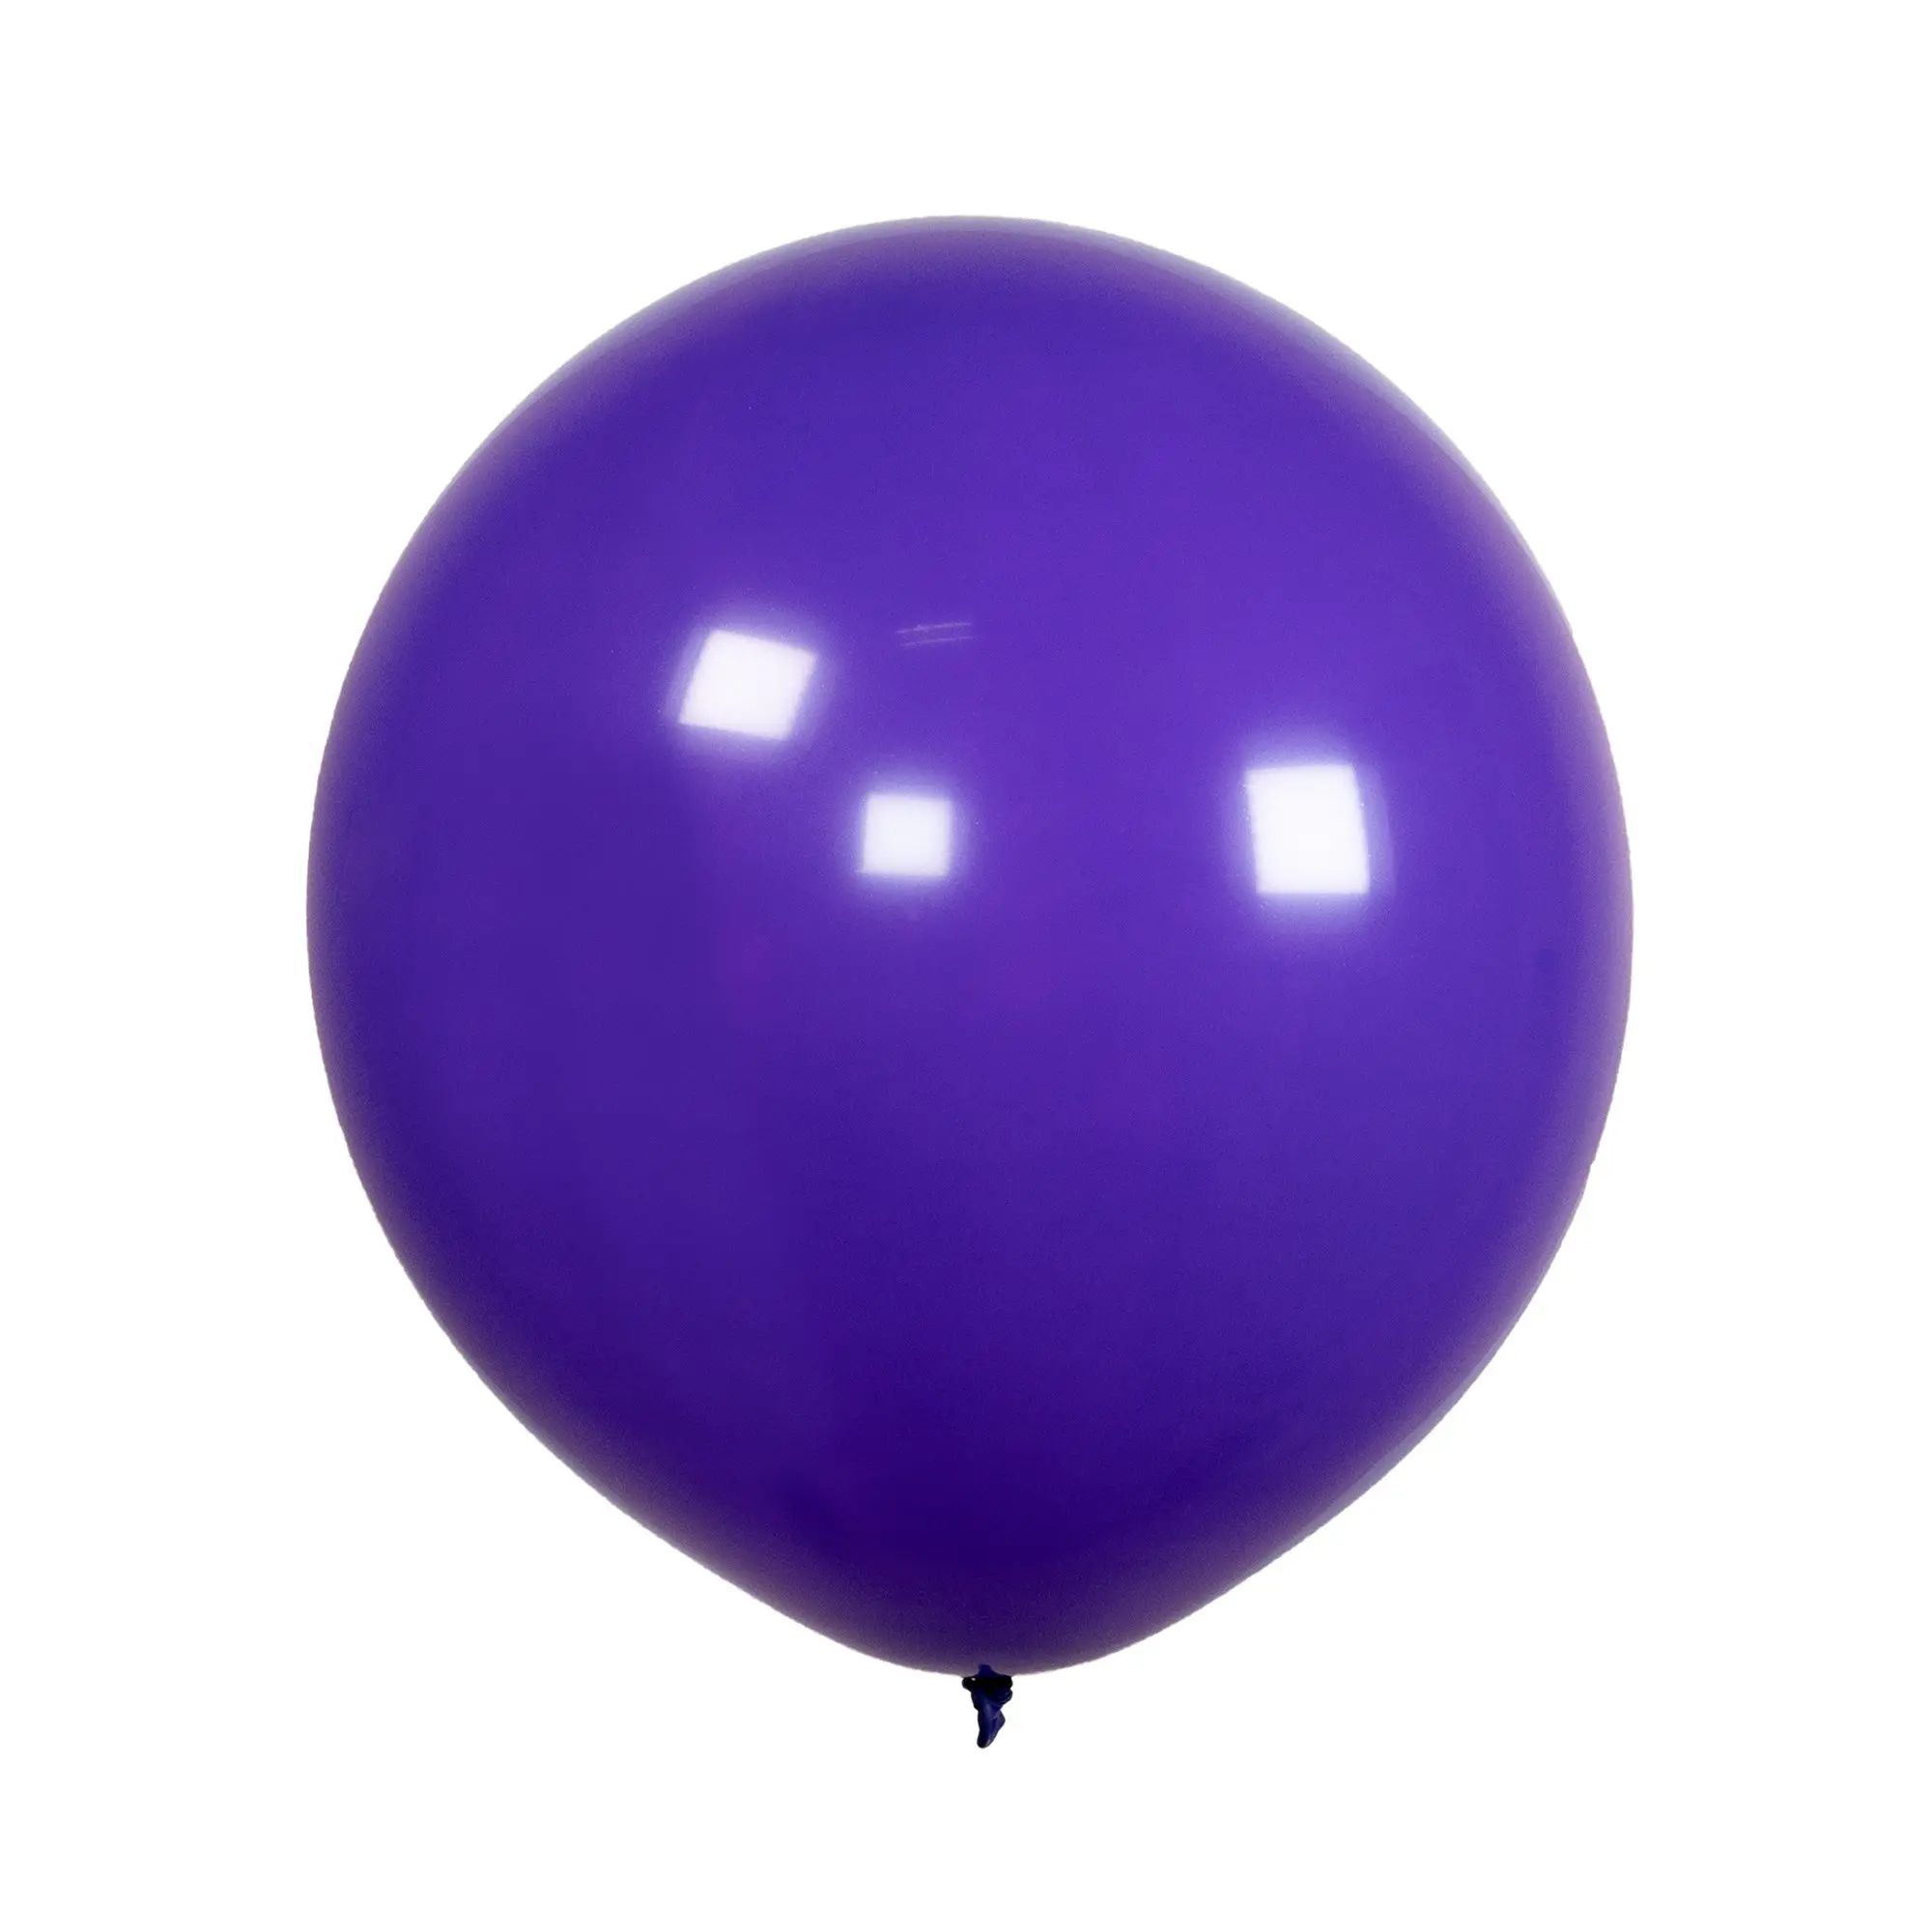 Latex colorful balloon – 48 cm - Violet